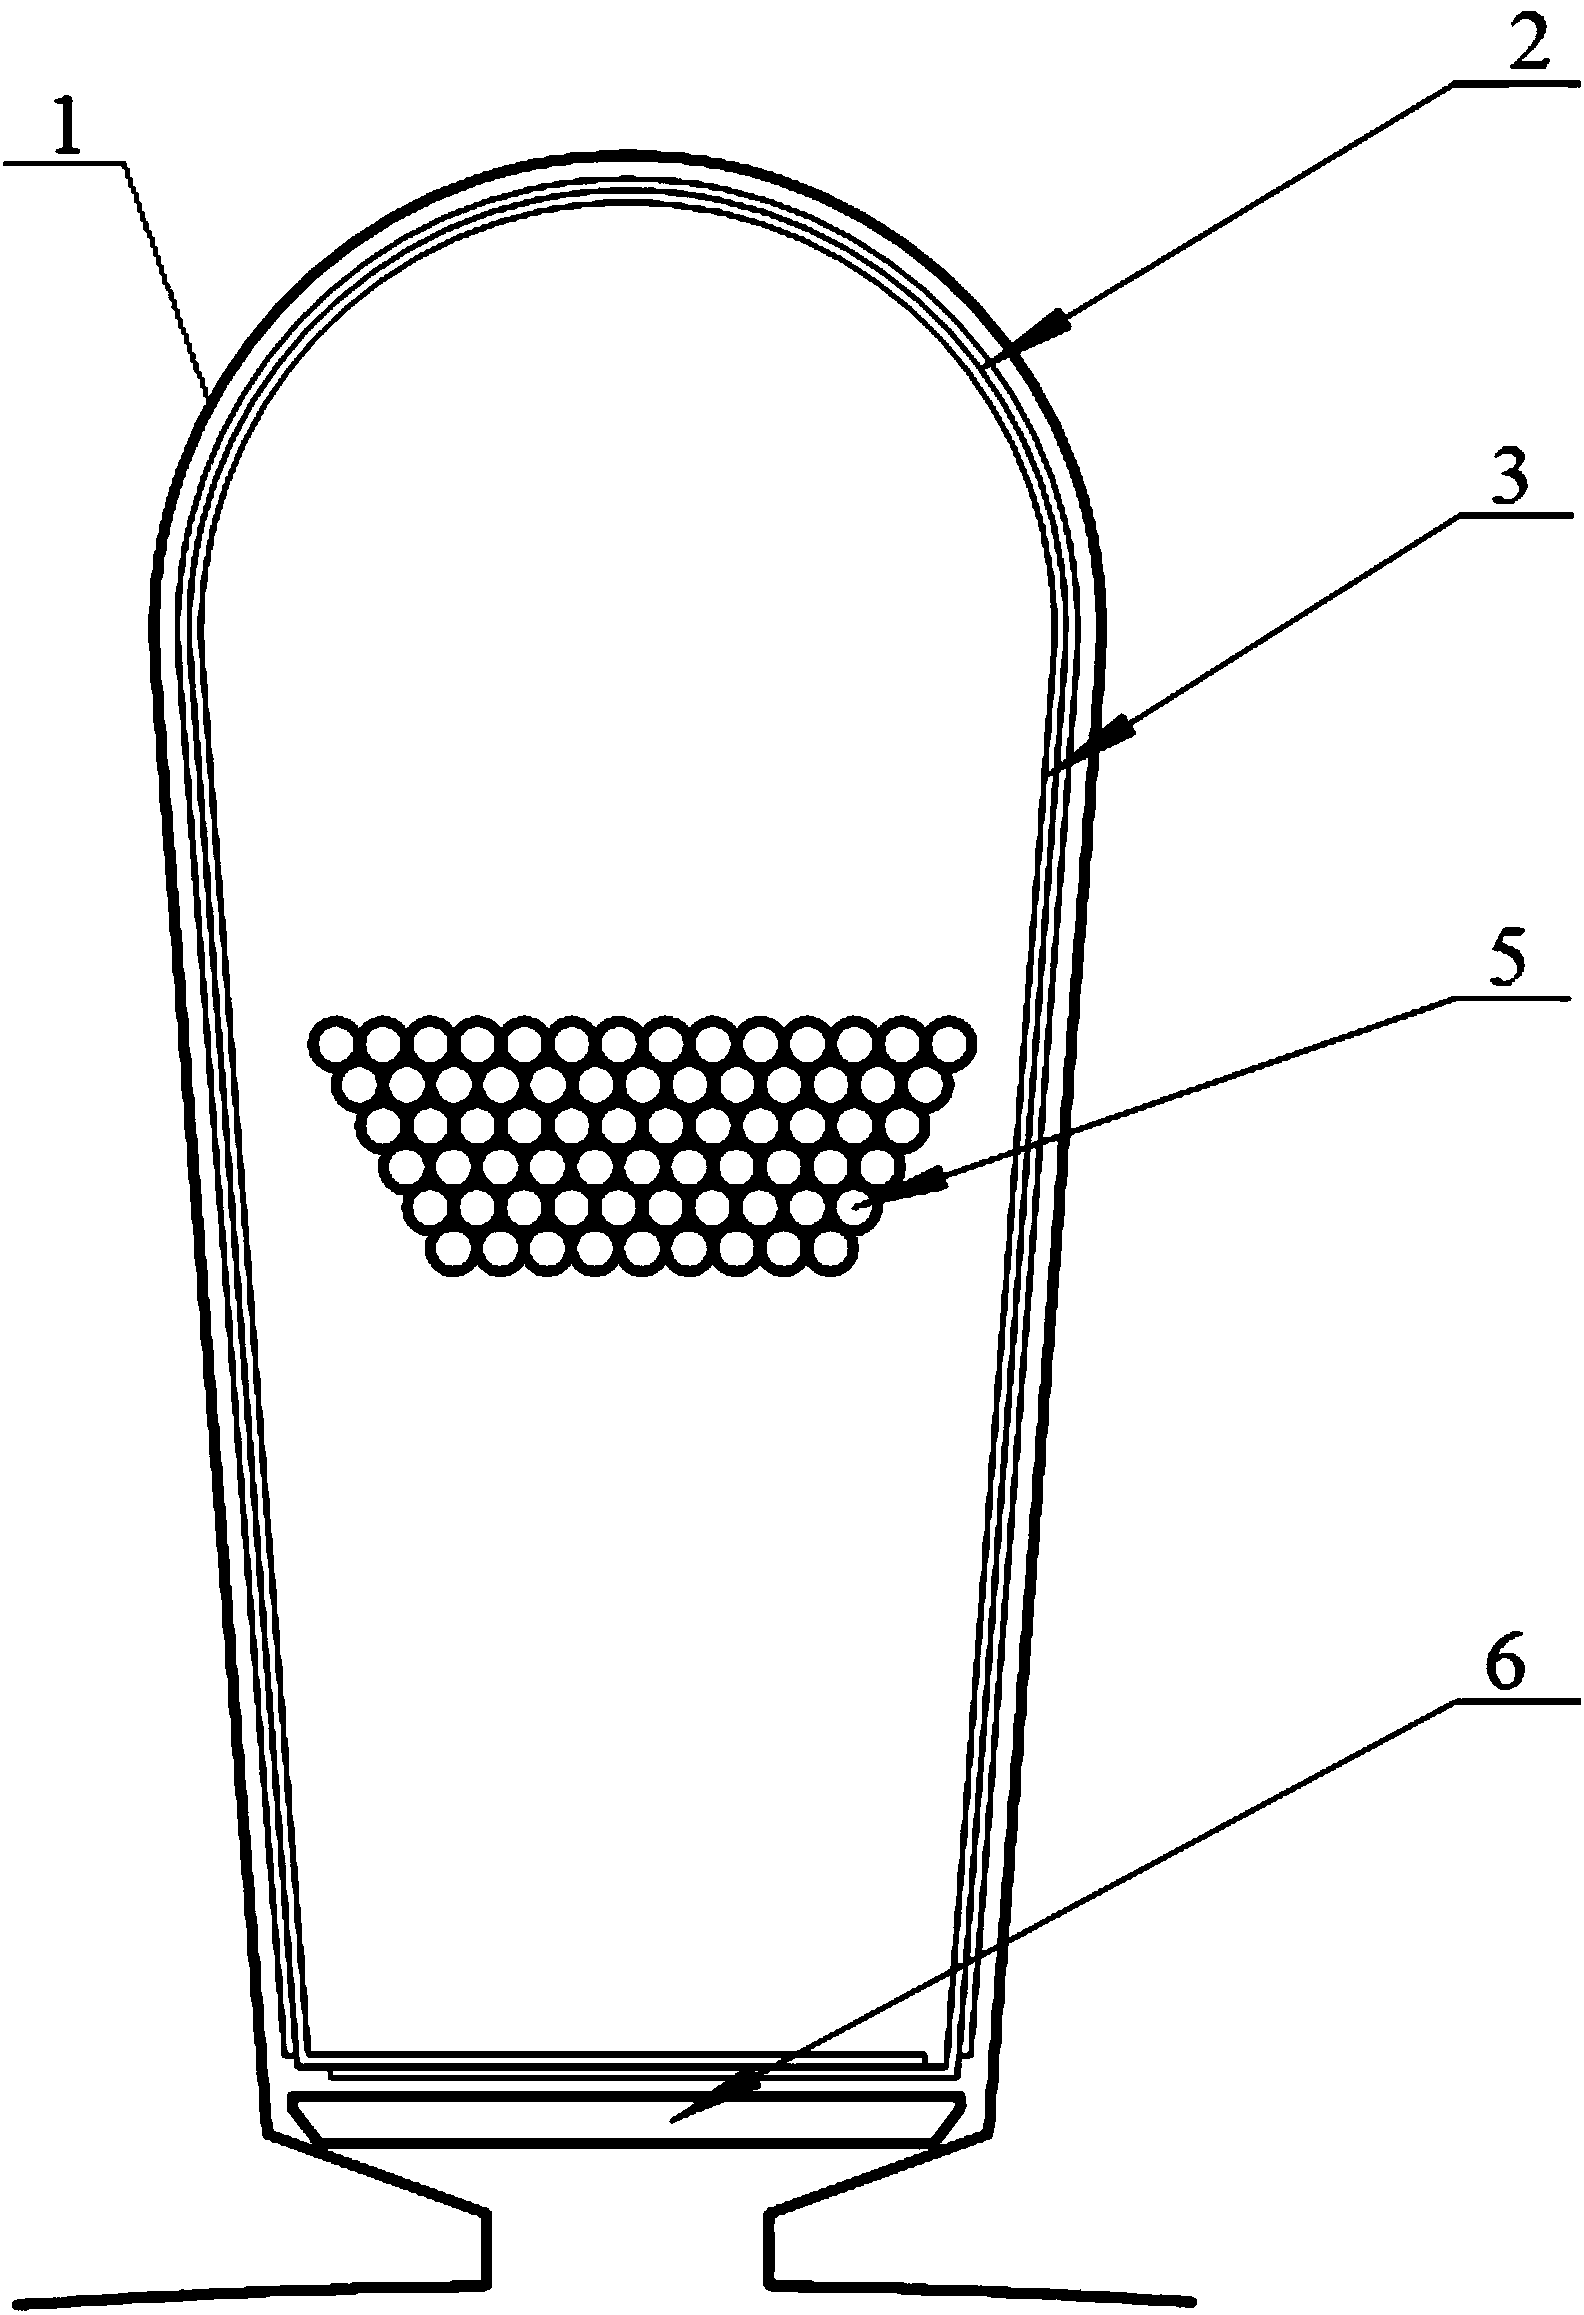 Low-voltage motor slot insulation structure